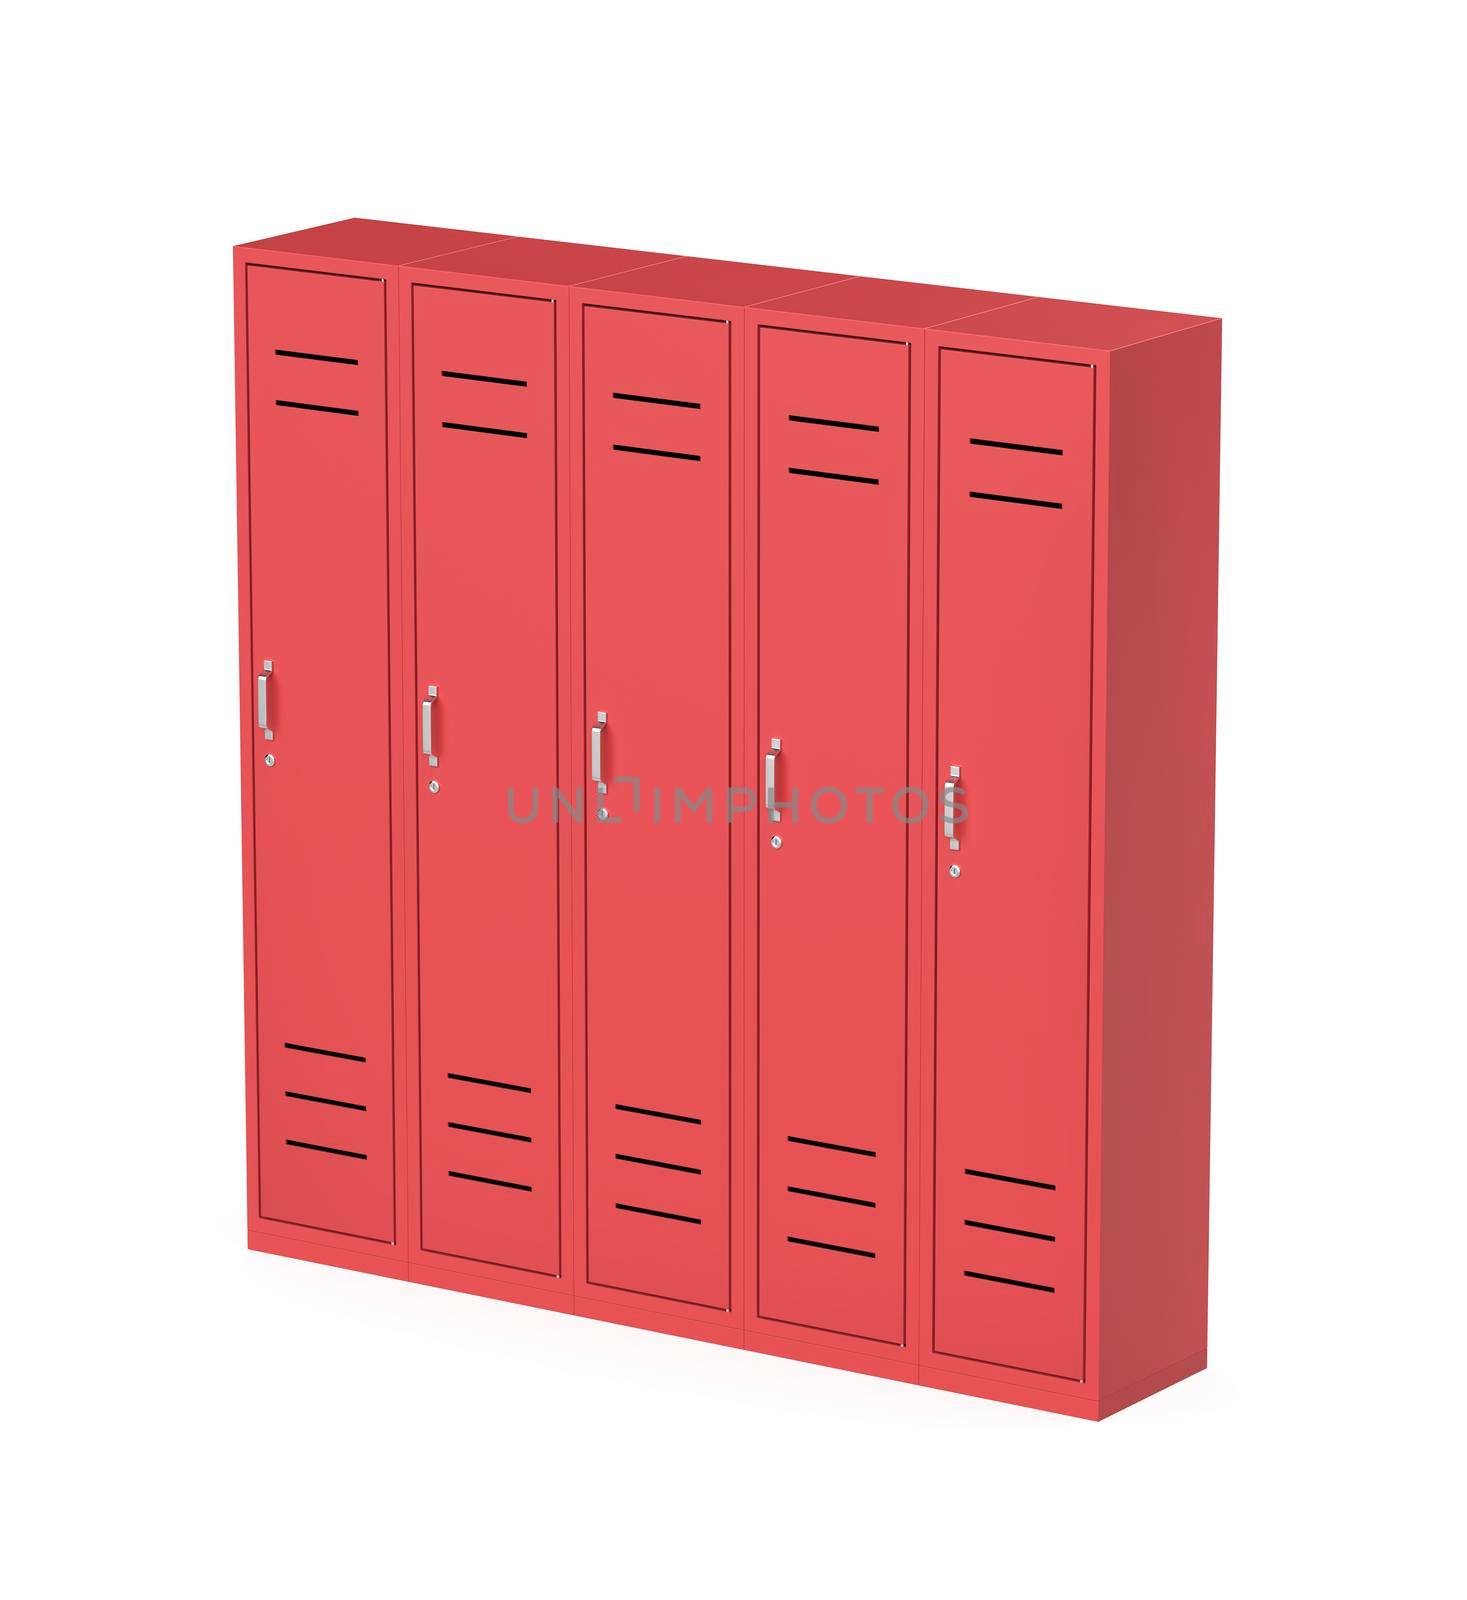 Five red metal lockers by magraphics